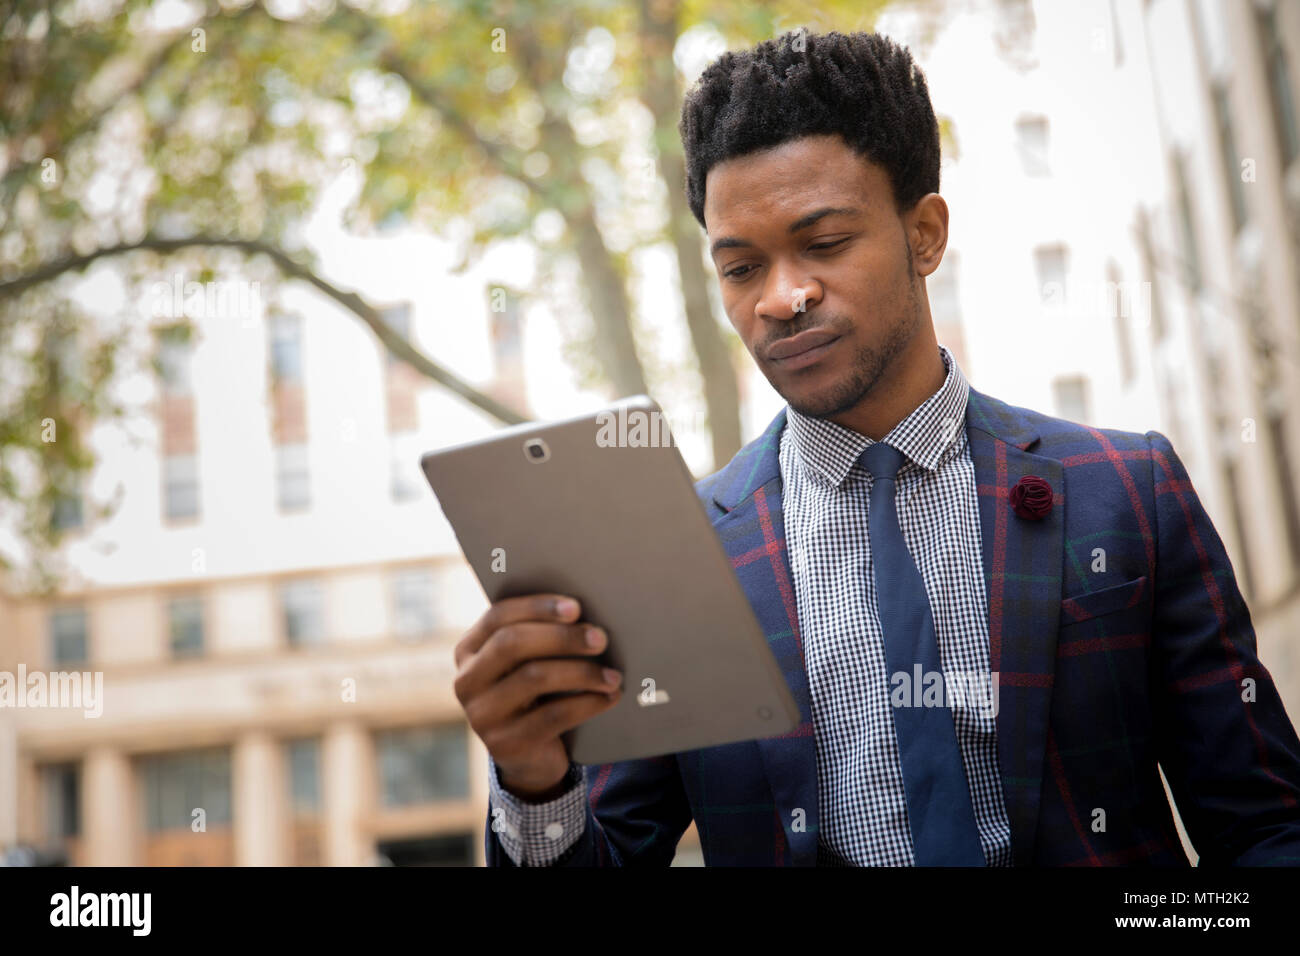 Business man reading a tablet Stock Photo